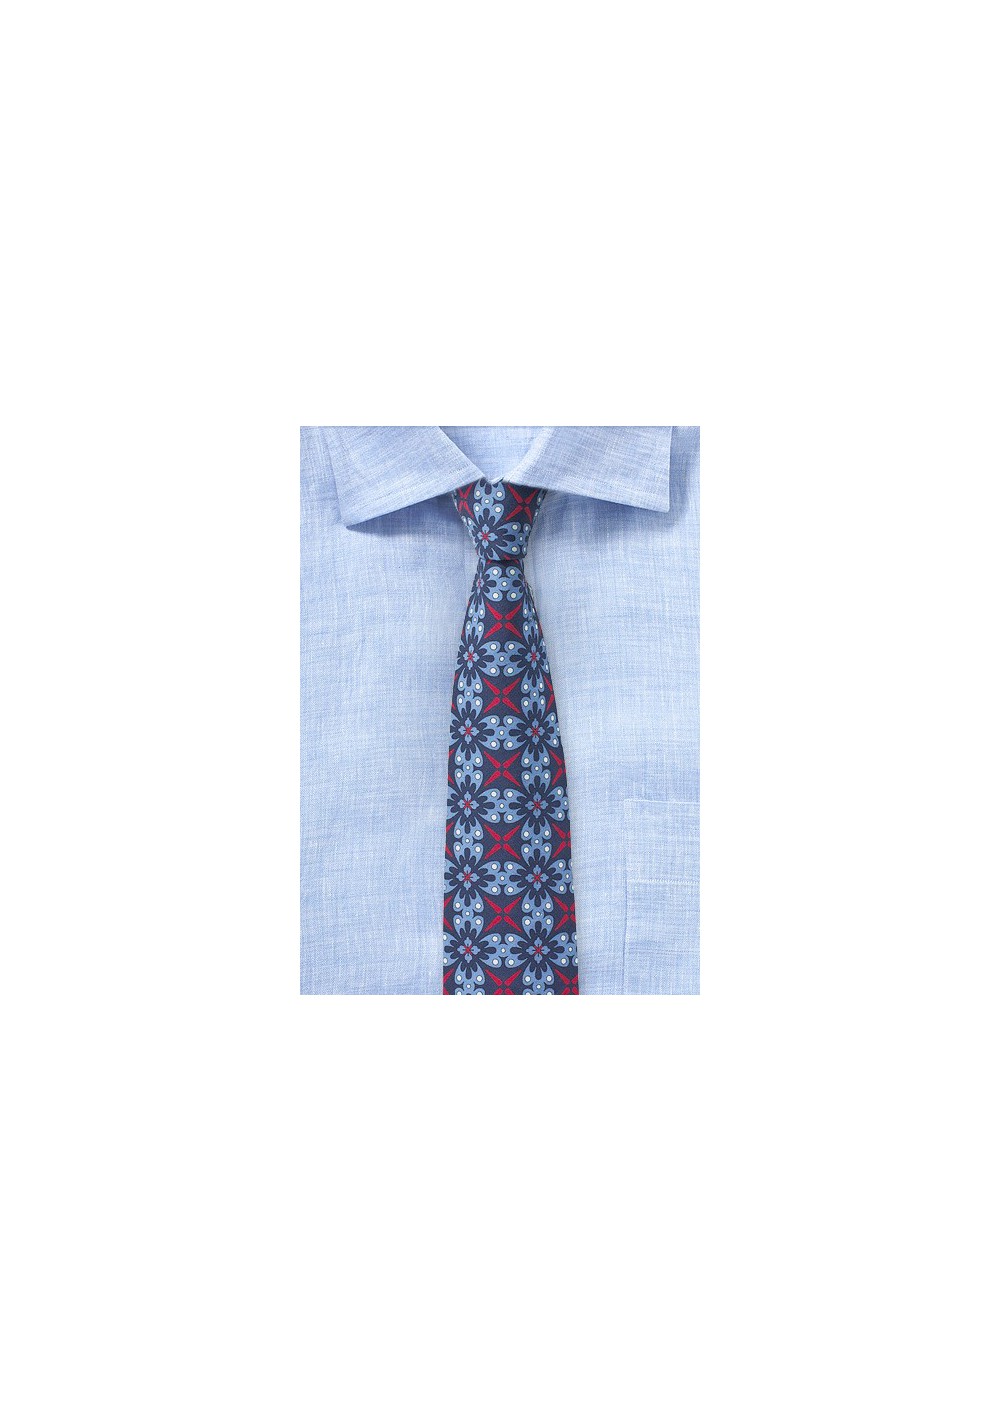 Wild Cotton Print Skinny Tie in Red and Blues